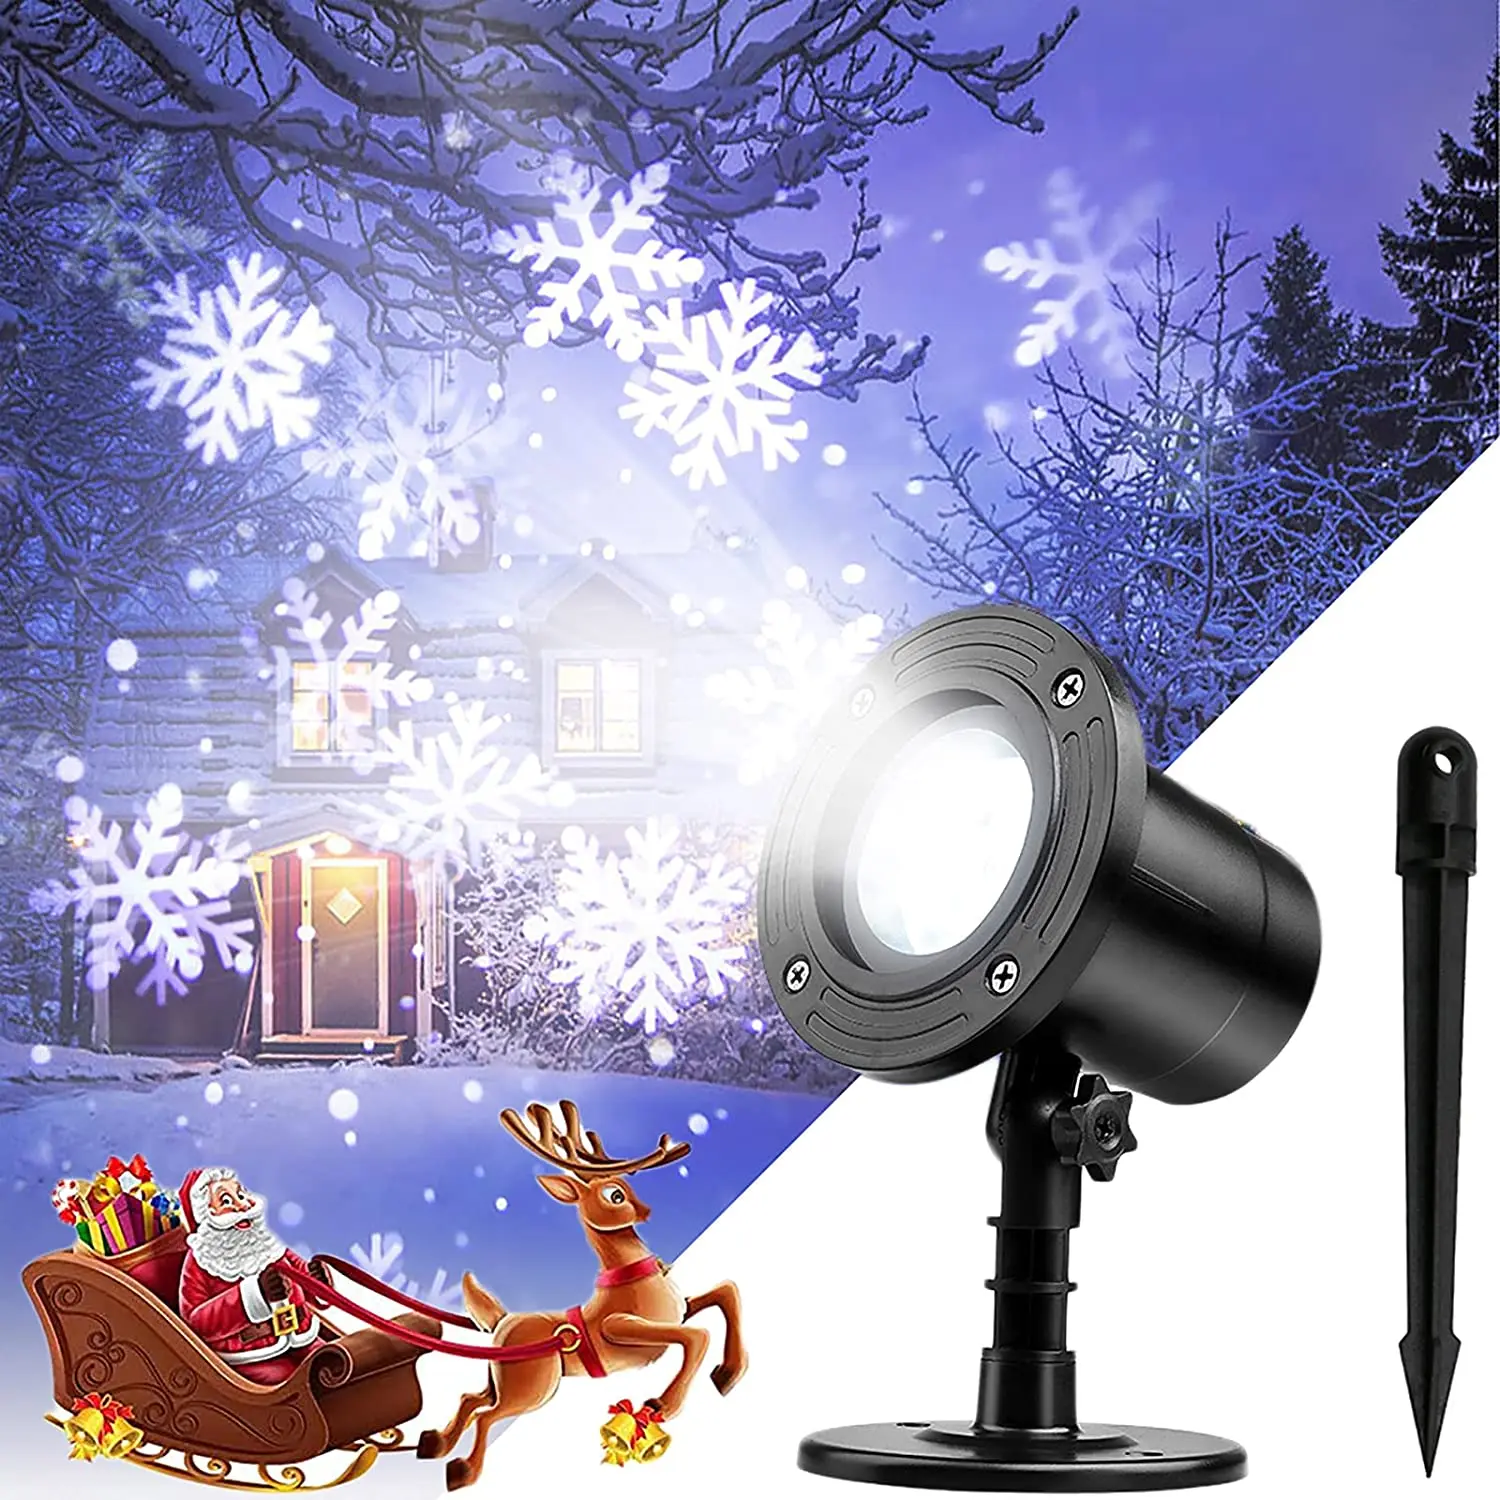 

Christmas Snowflake Projection Lights LED Outdoor Projector Lamp IP65 Waterproof Outdoor Landscape Lighting Snowfall Light